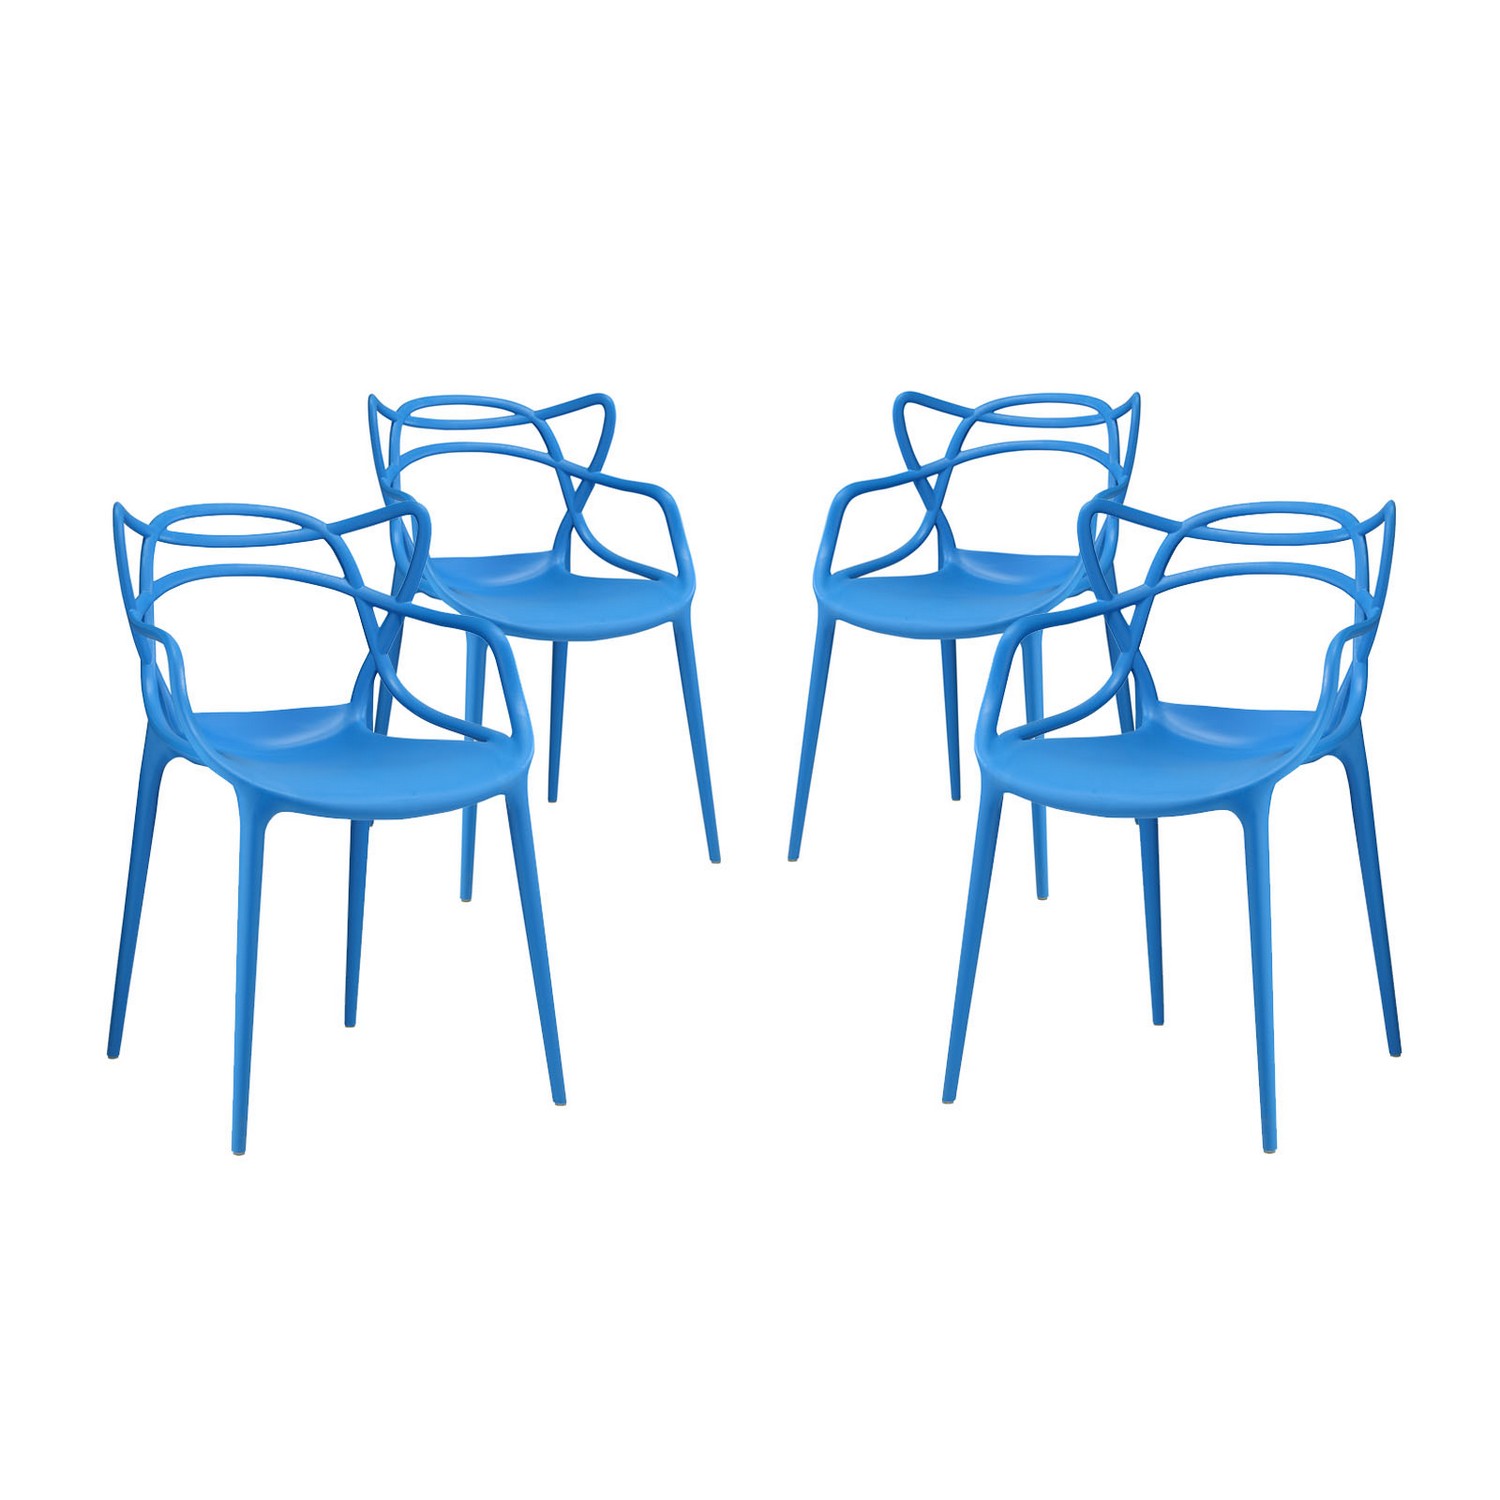 Modway Entangled Dining Chair - Set of 4 - Blue